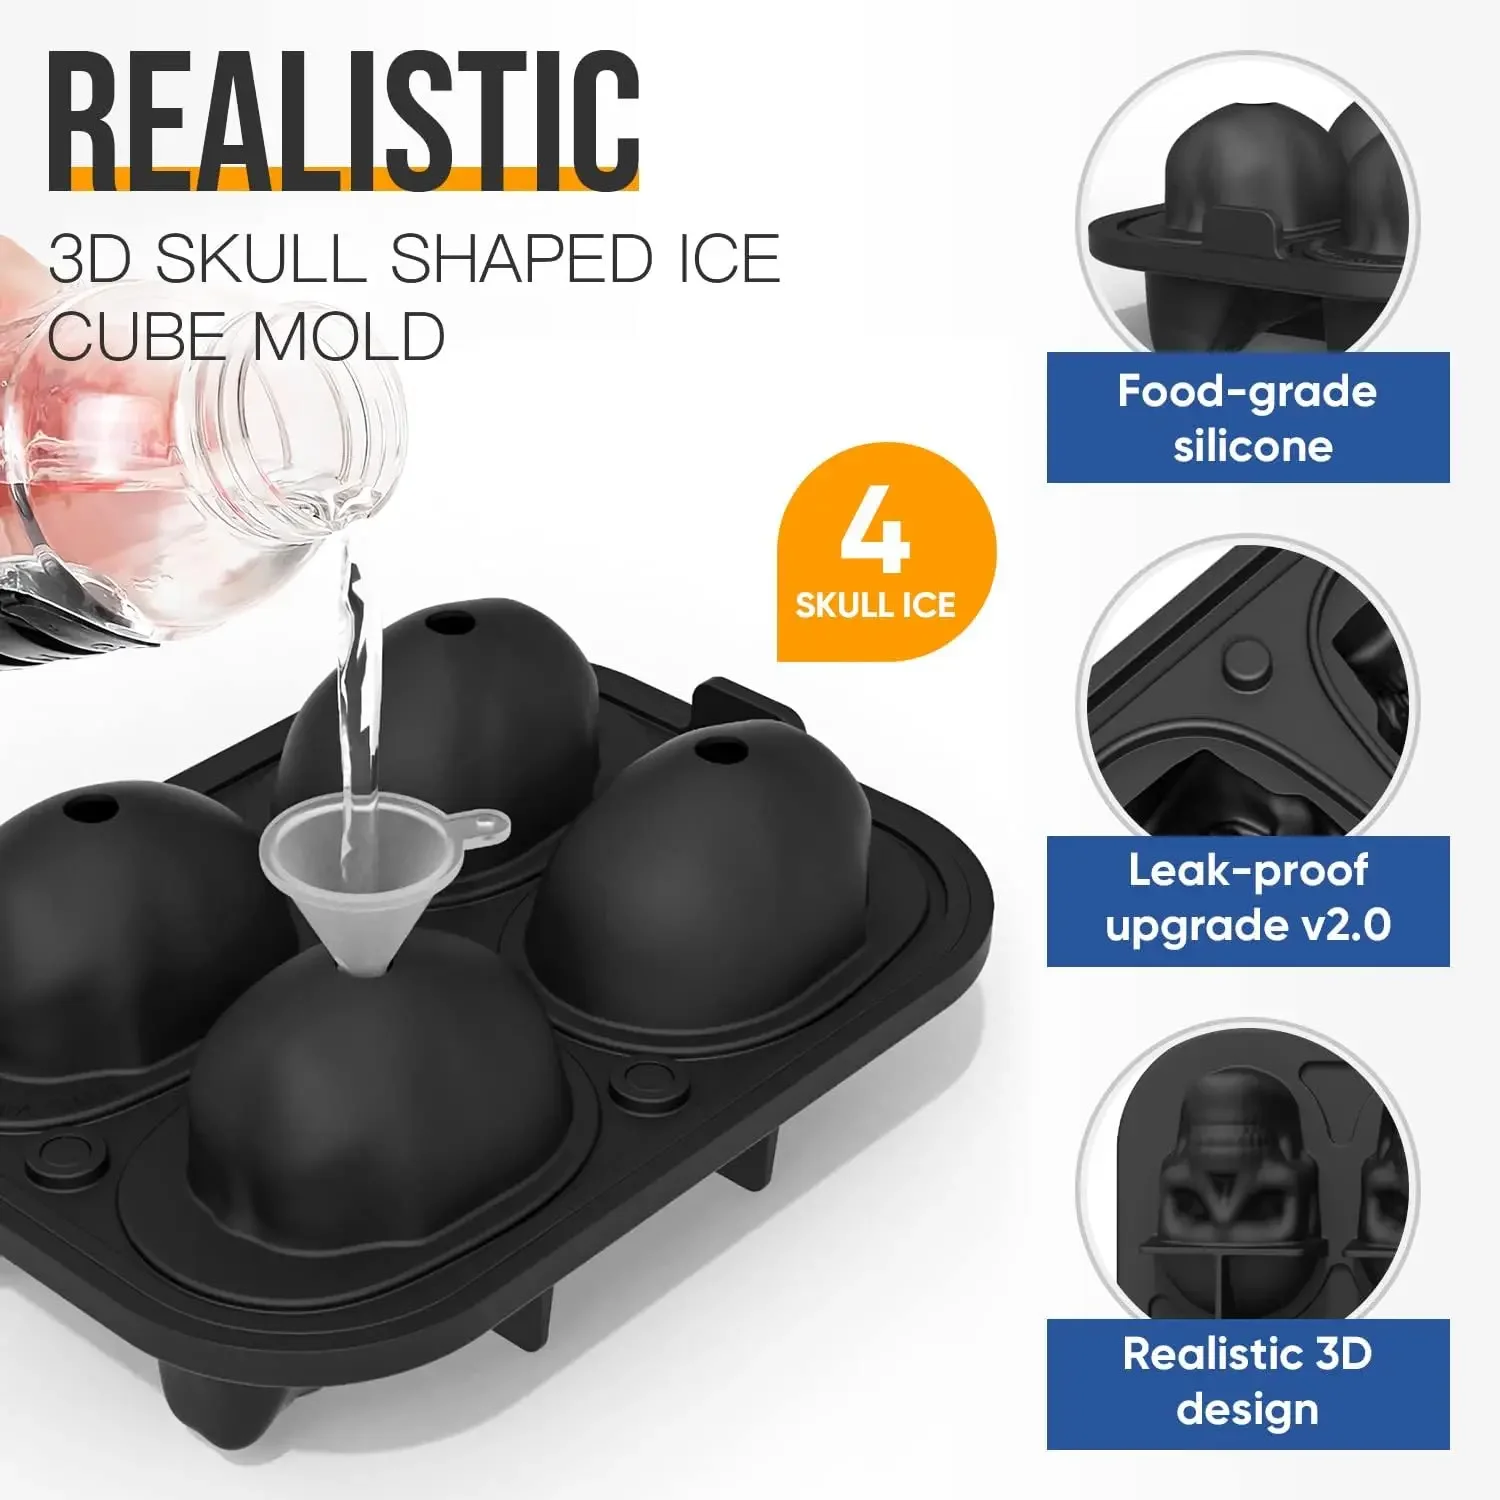 https://ae01.alicdn.com/kf/S4c57f22737ed4290a25a14687929b8596/Extra-Large-3D-Skull-Ice-Cube-Mold-Flexible-Silicone-Maker-4-Cavity-Tray-for-Whiskey-Baking.png